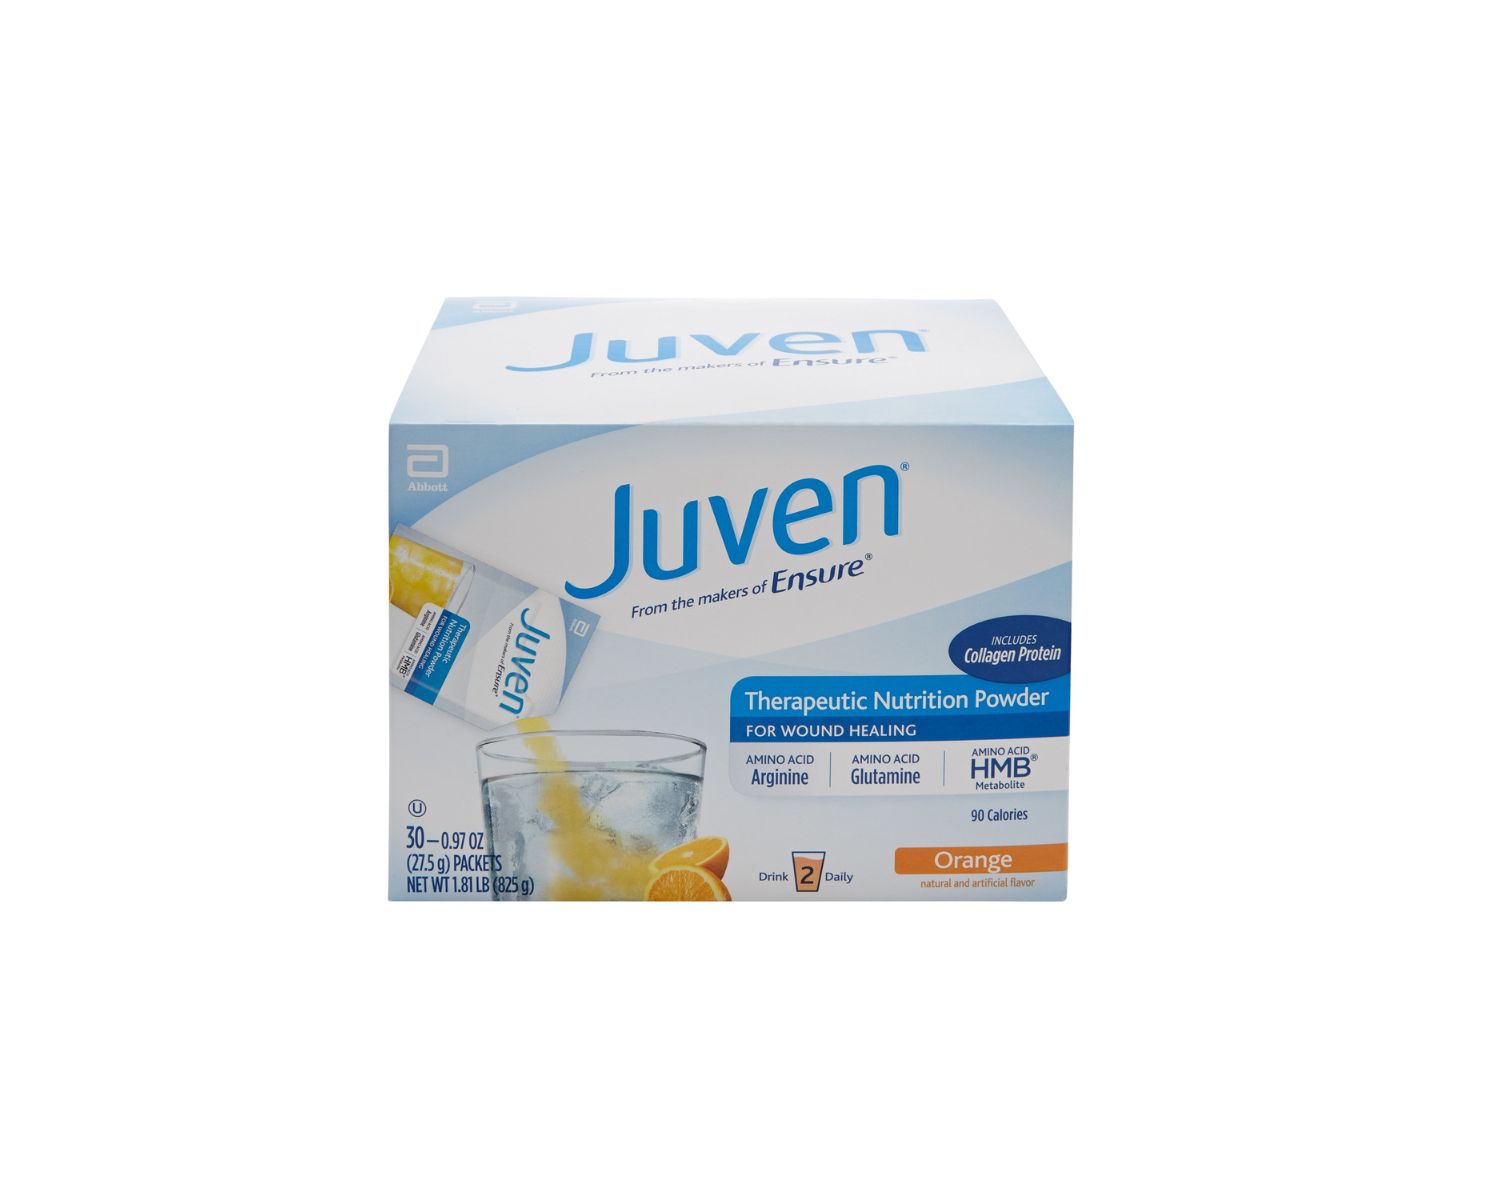 12-fascinating-facts-about-juven